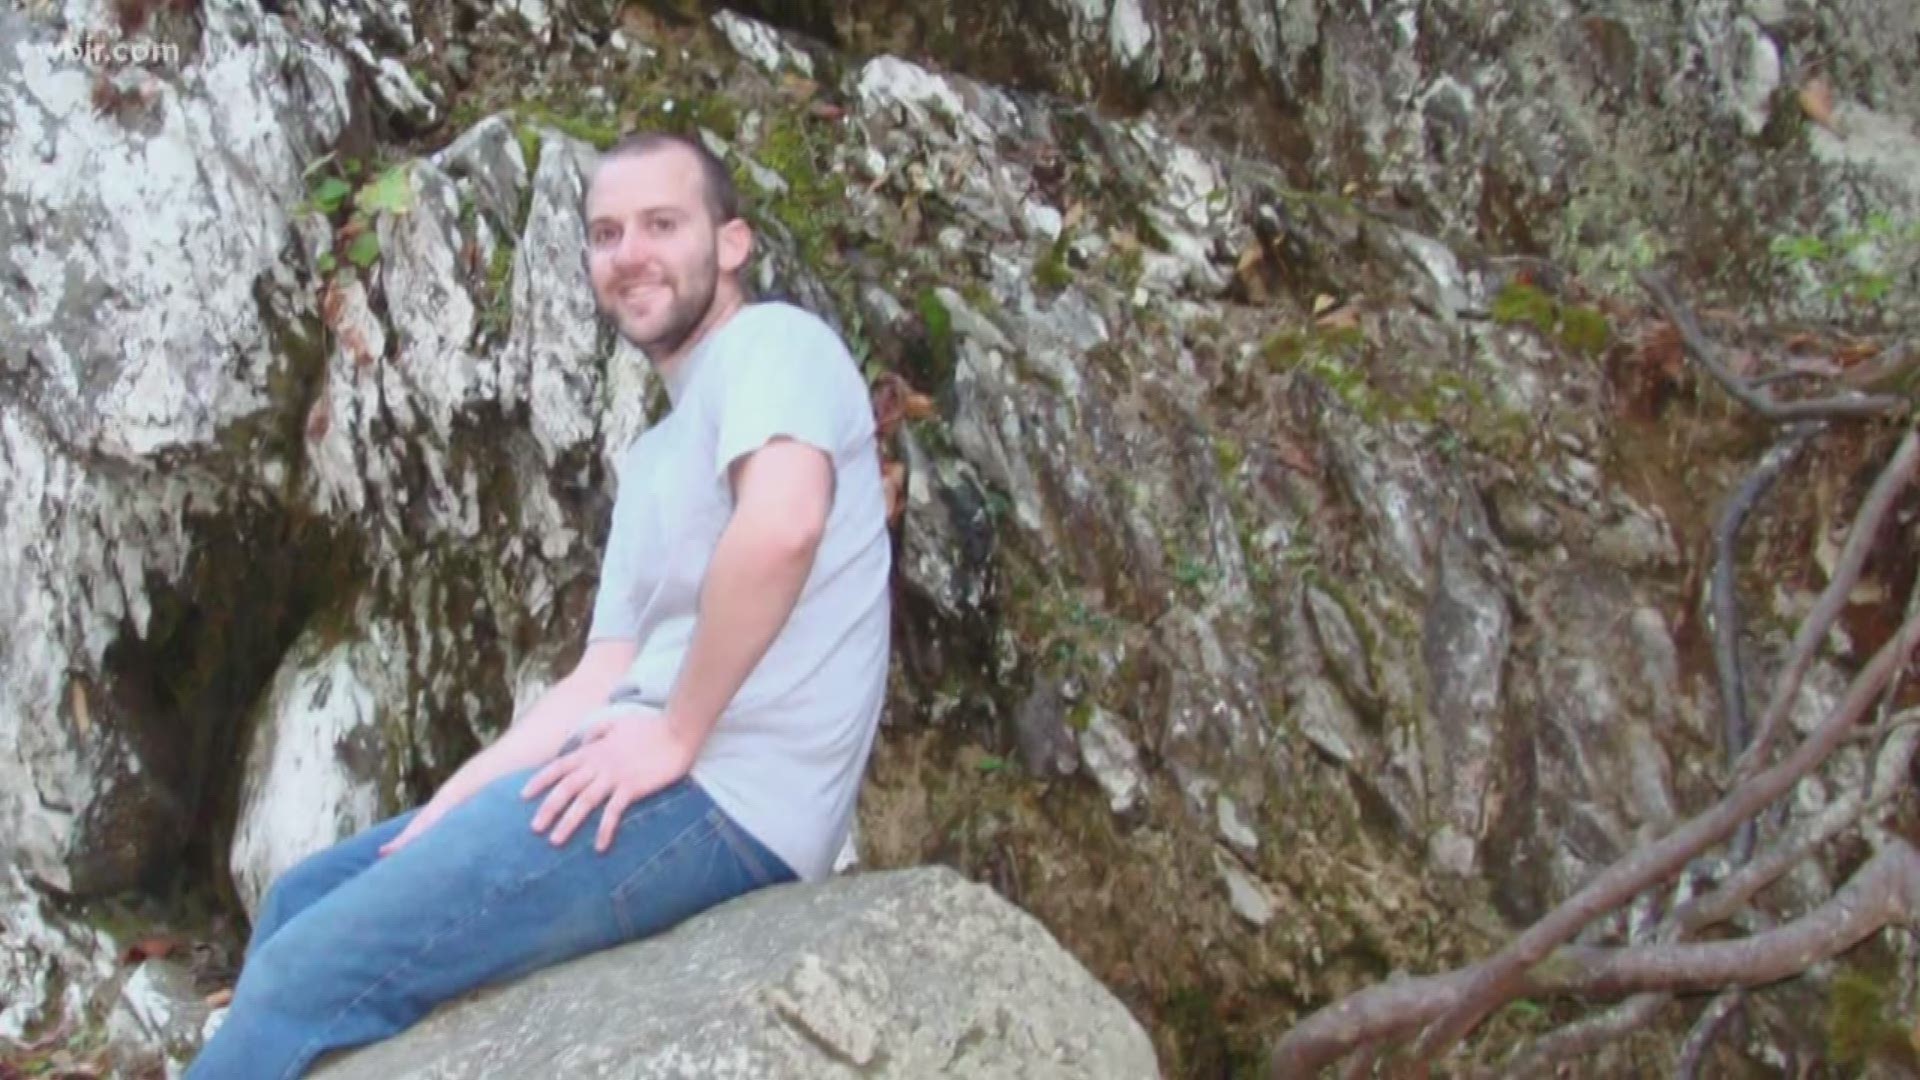 Dec. 15, 2017: Derek Lueking was kind, dependable and just two months shy of his 25th birthday when he vanished in the Great Smoky Mountains in March 2012.